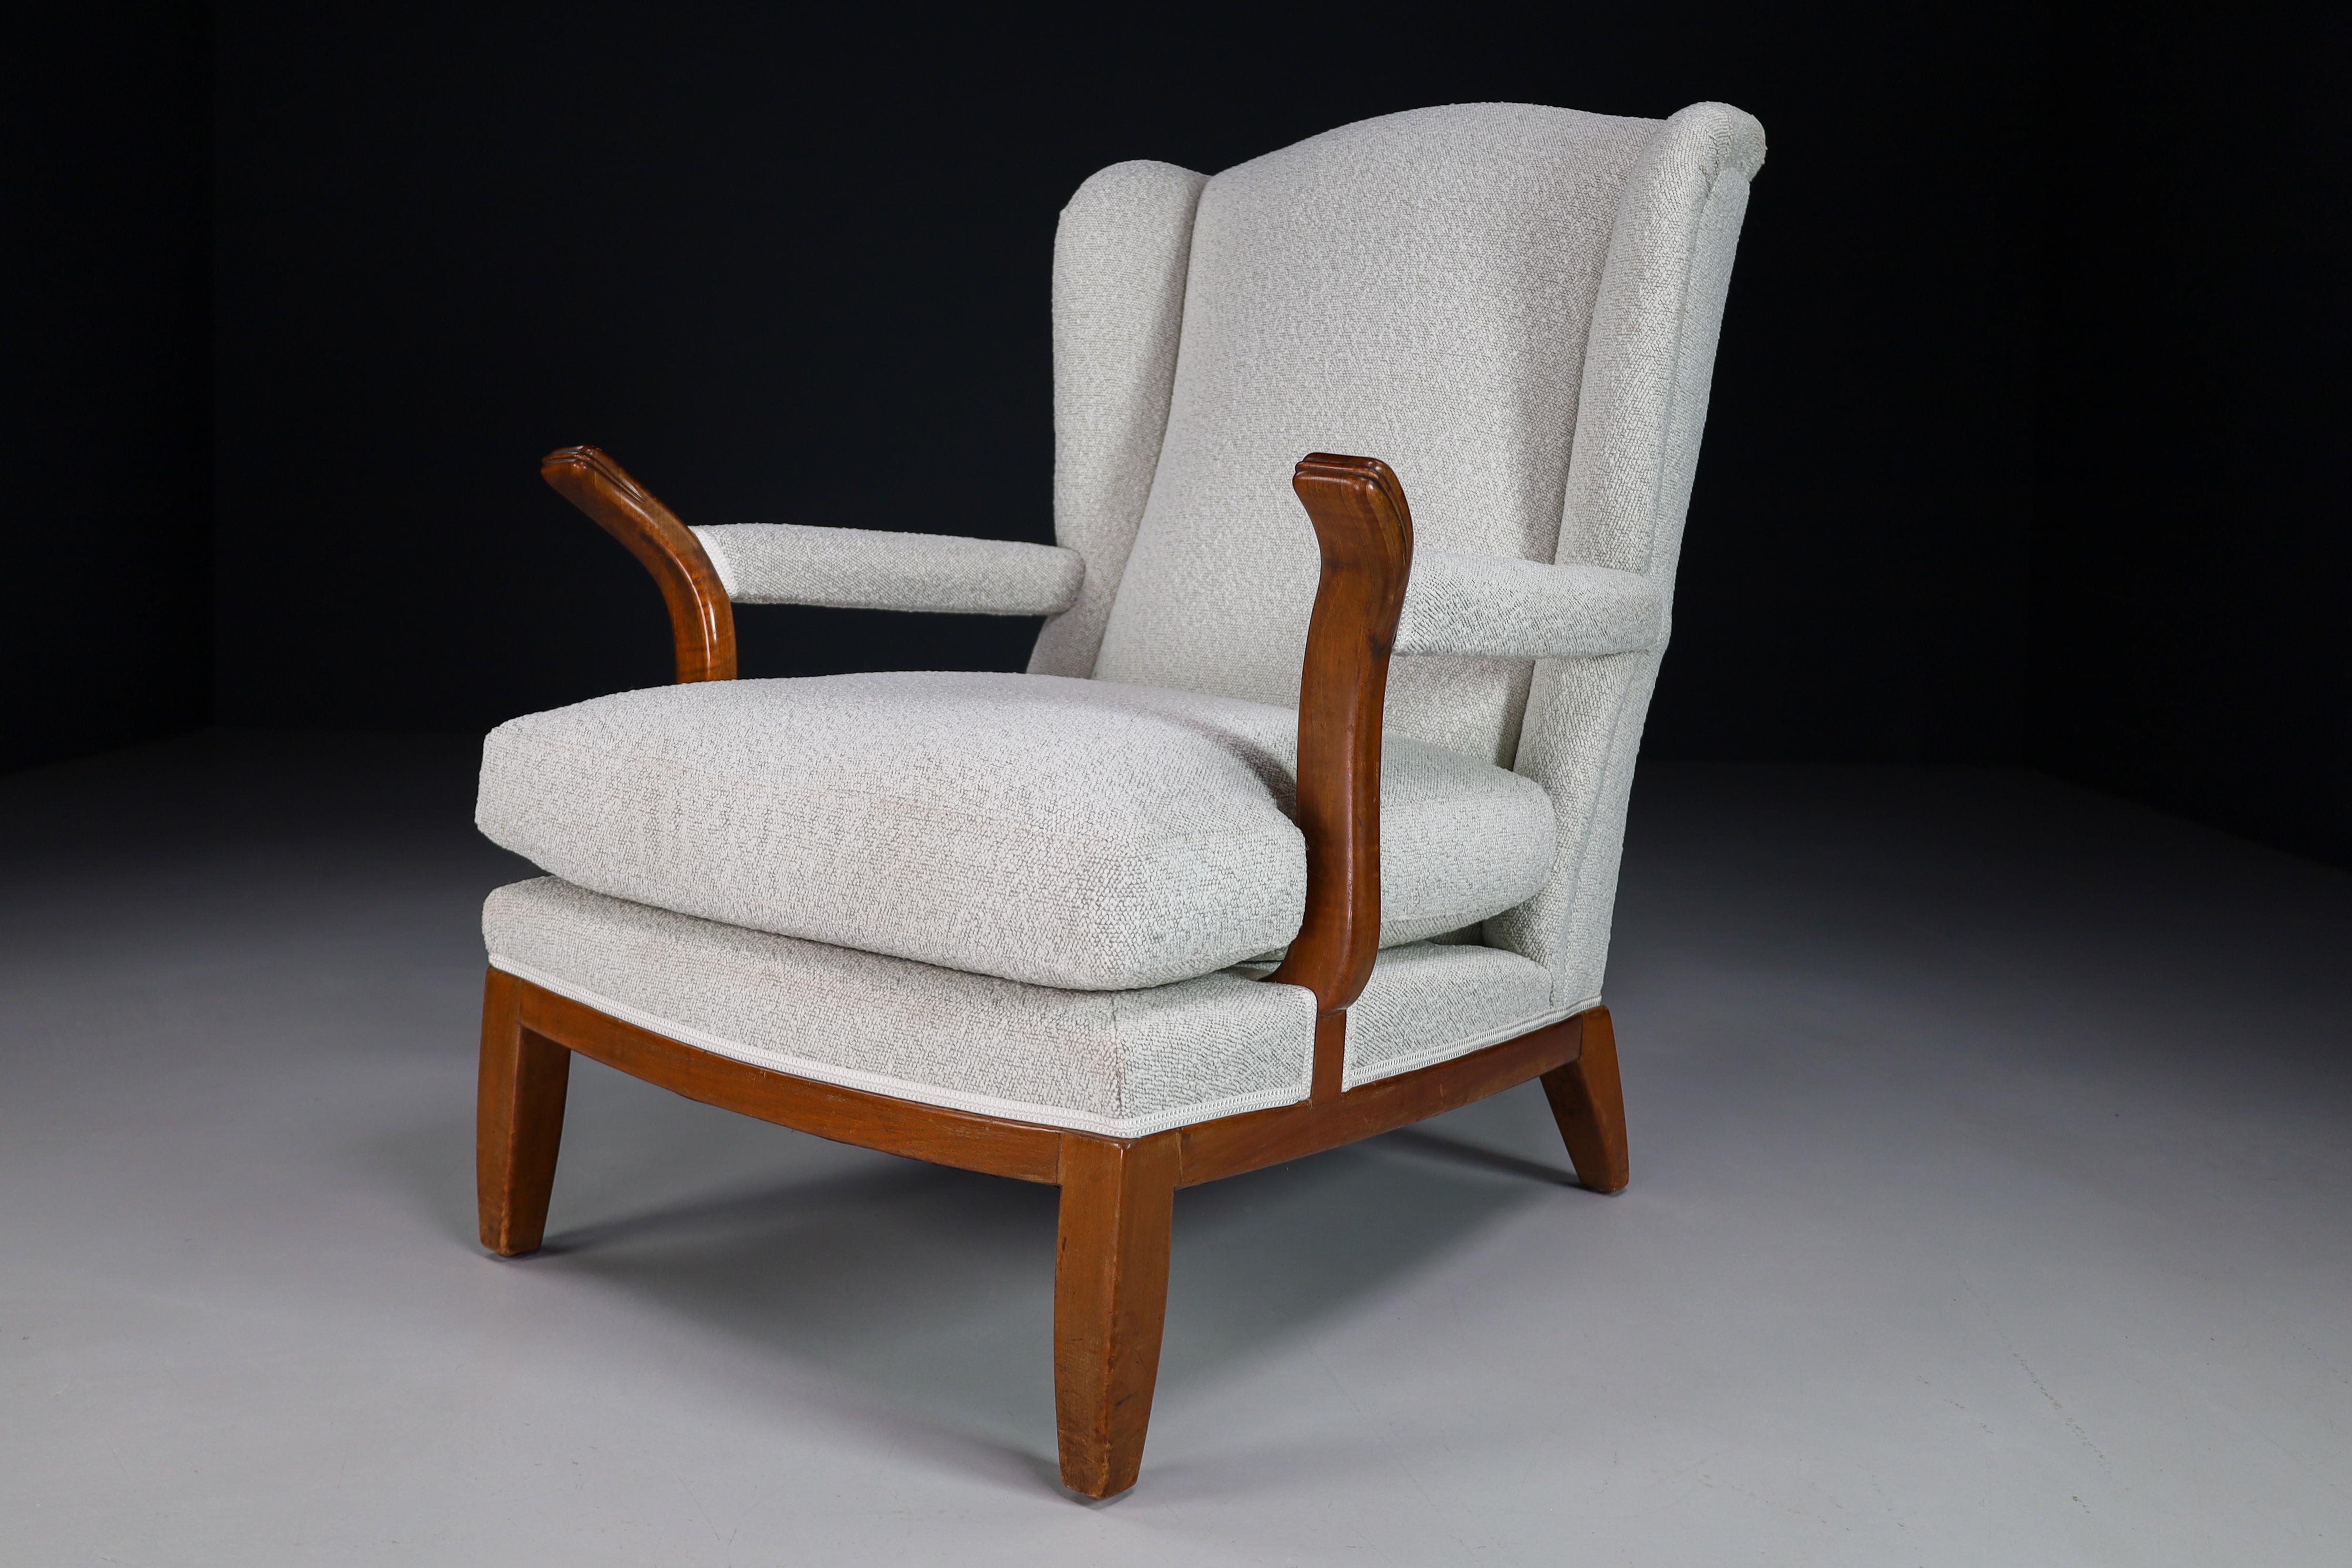 Large size wingback chair manufactured and designed in France 1930s. Made of Walnut and the wingback chair has just been reupholstered with Bouclé wool fabric. It is in perfect condition , minor patina on wood parts. This amazing seat would make an